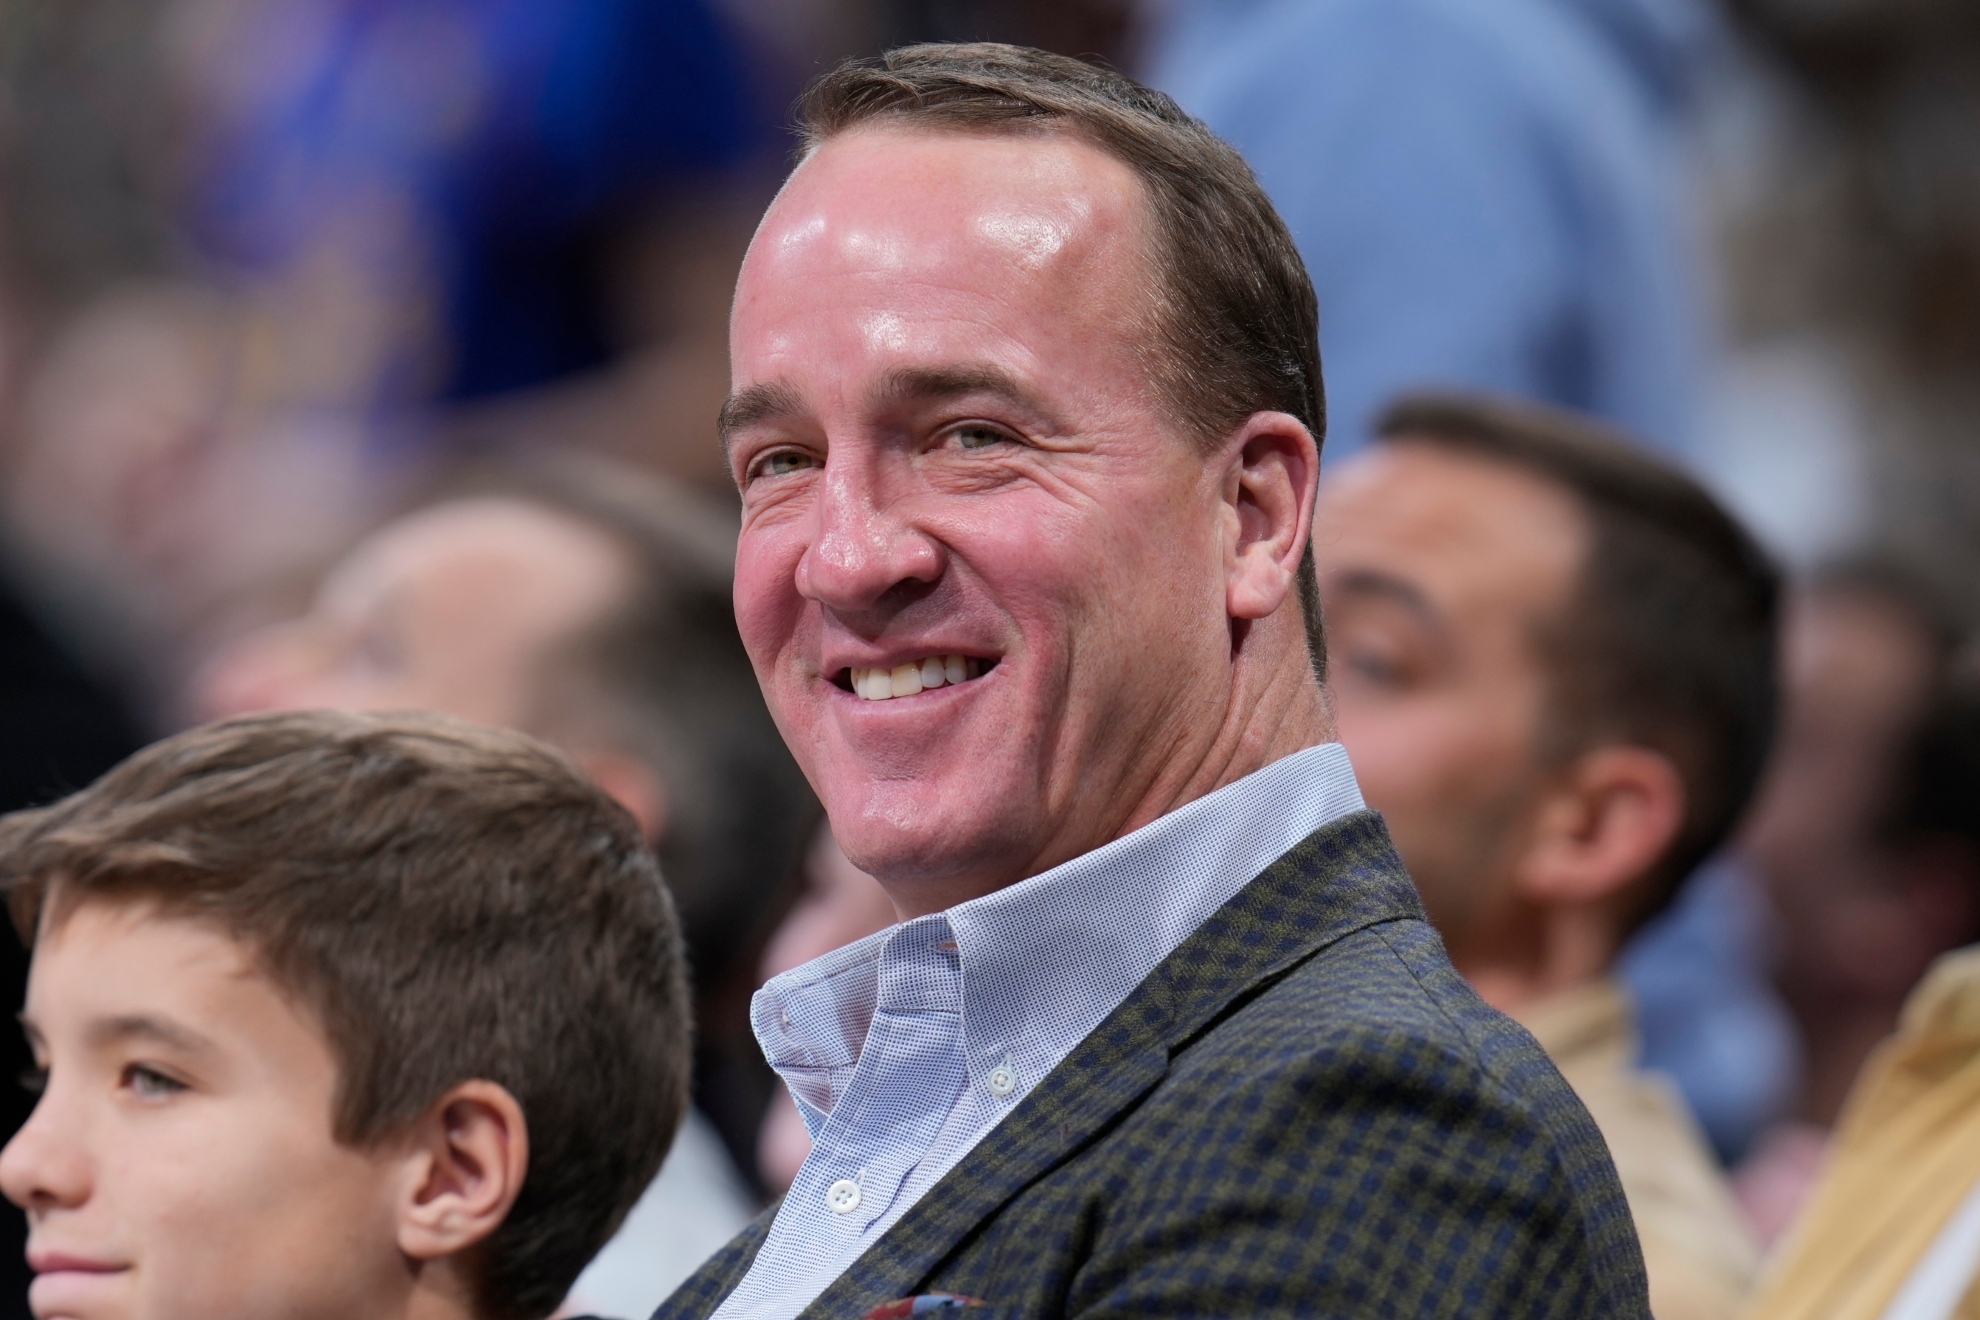 Retired NFL quarterback Peyton Manning smiles for cameras as he is introduced in the first half of an NBA basketball game between the Memphis Grizzlies and the Denver Nuggets